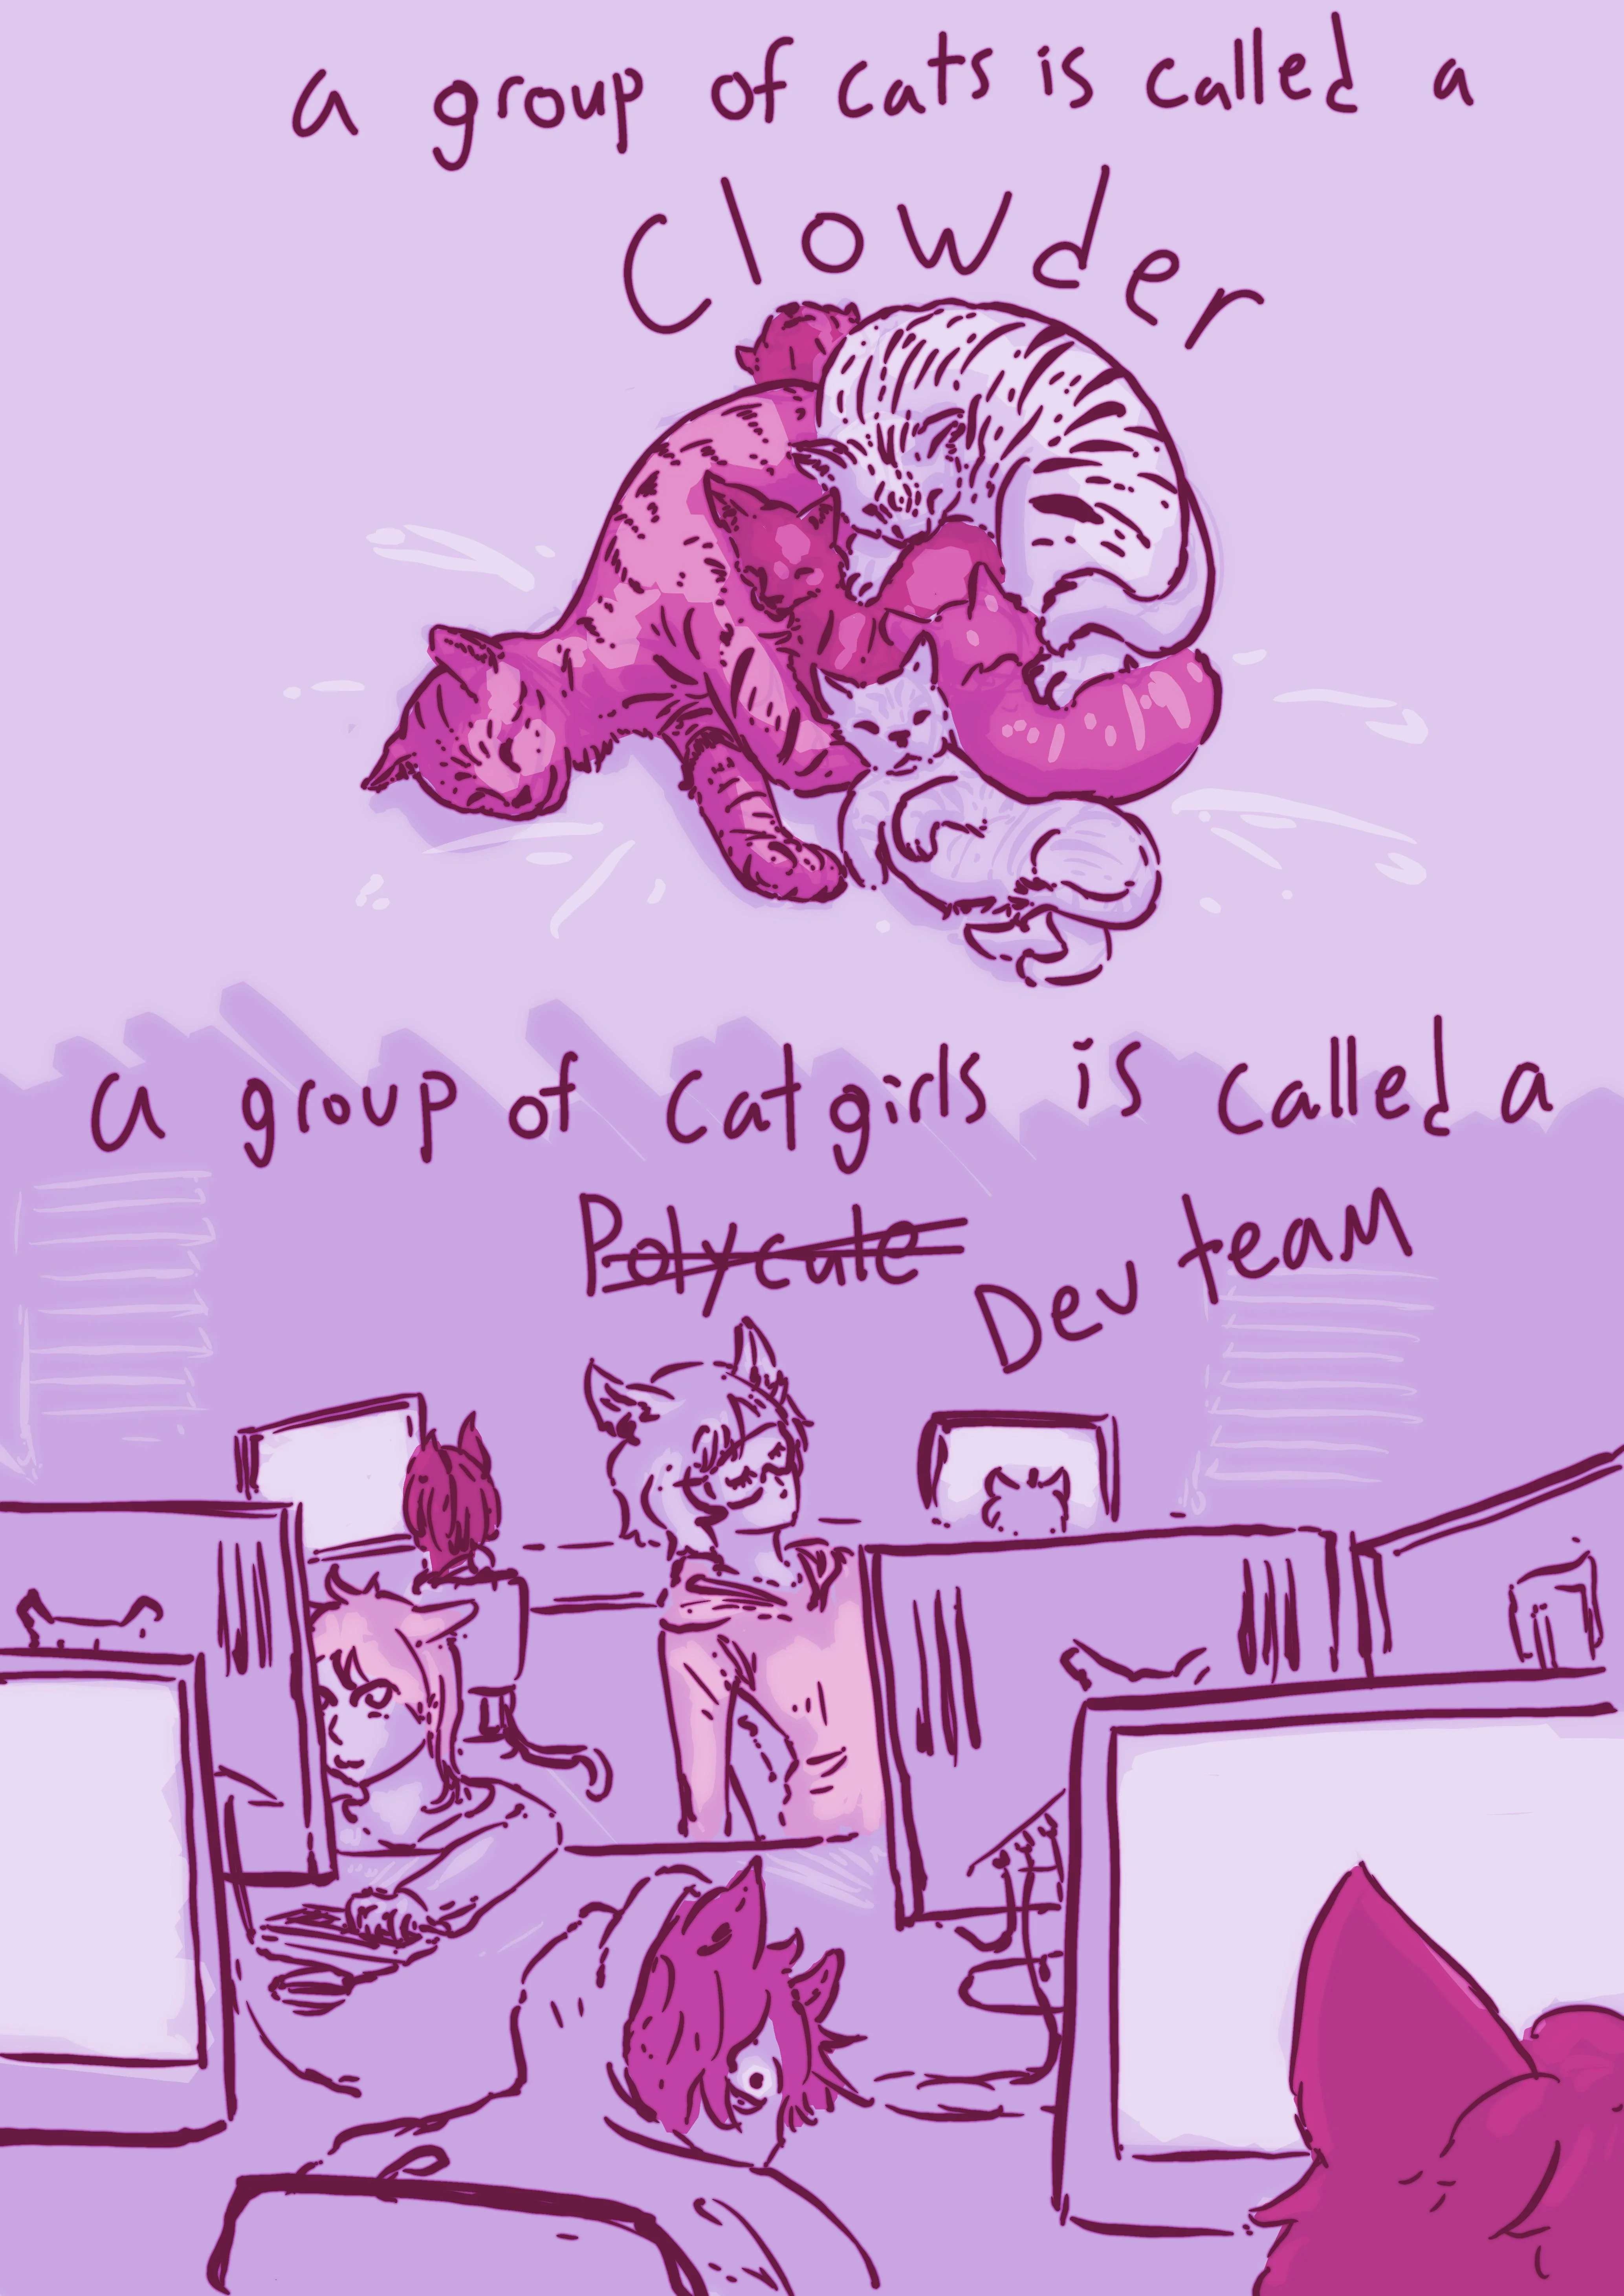 Comic. Panel 1: "A group of cats is called a clowder". Panel 2: "A group of catgirls is called a (crossed out) polycule, (scrawled over) dev team."